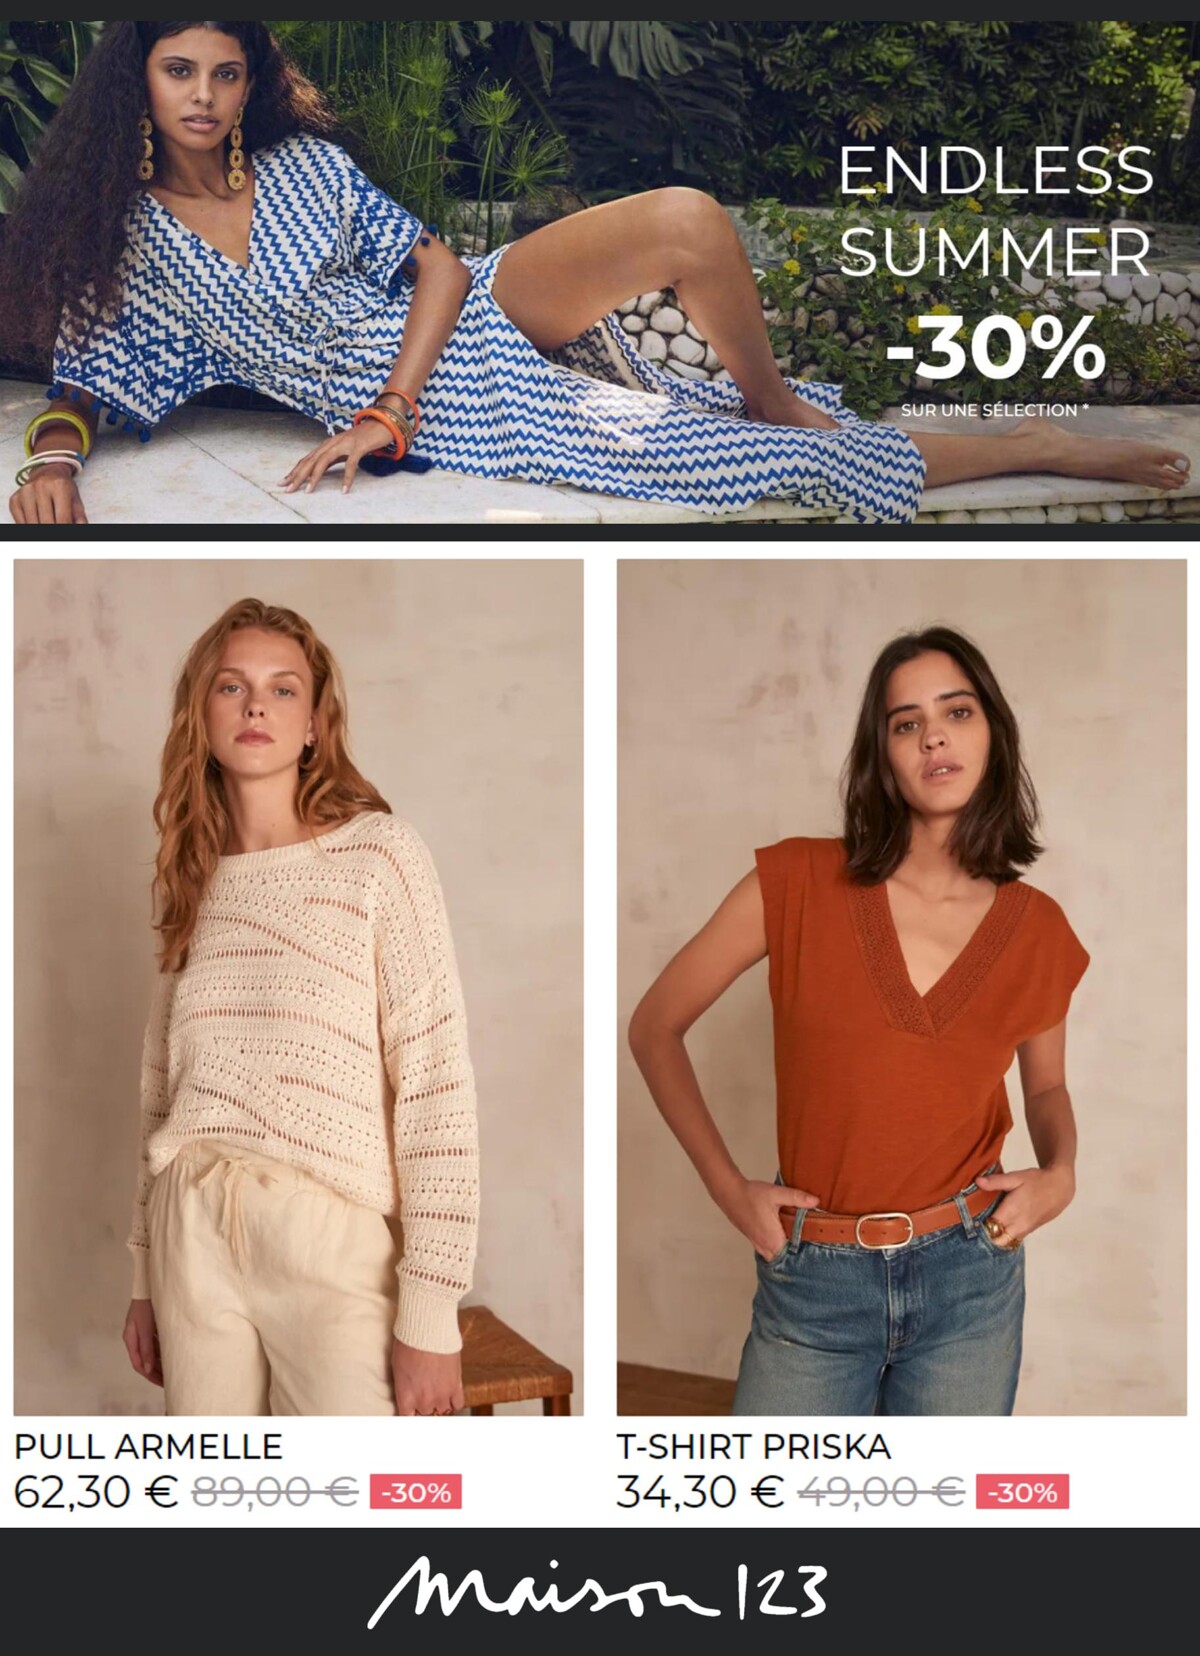 Catalogue Endless Summer -30%*, page 00006